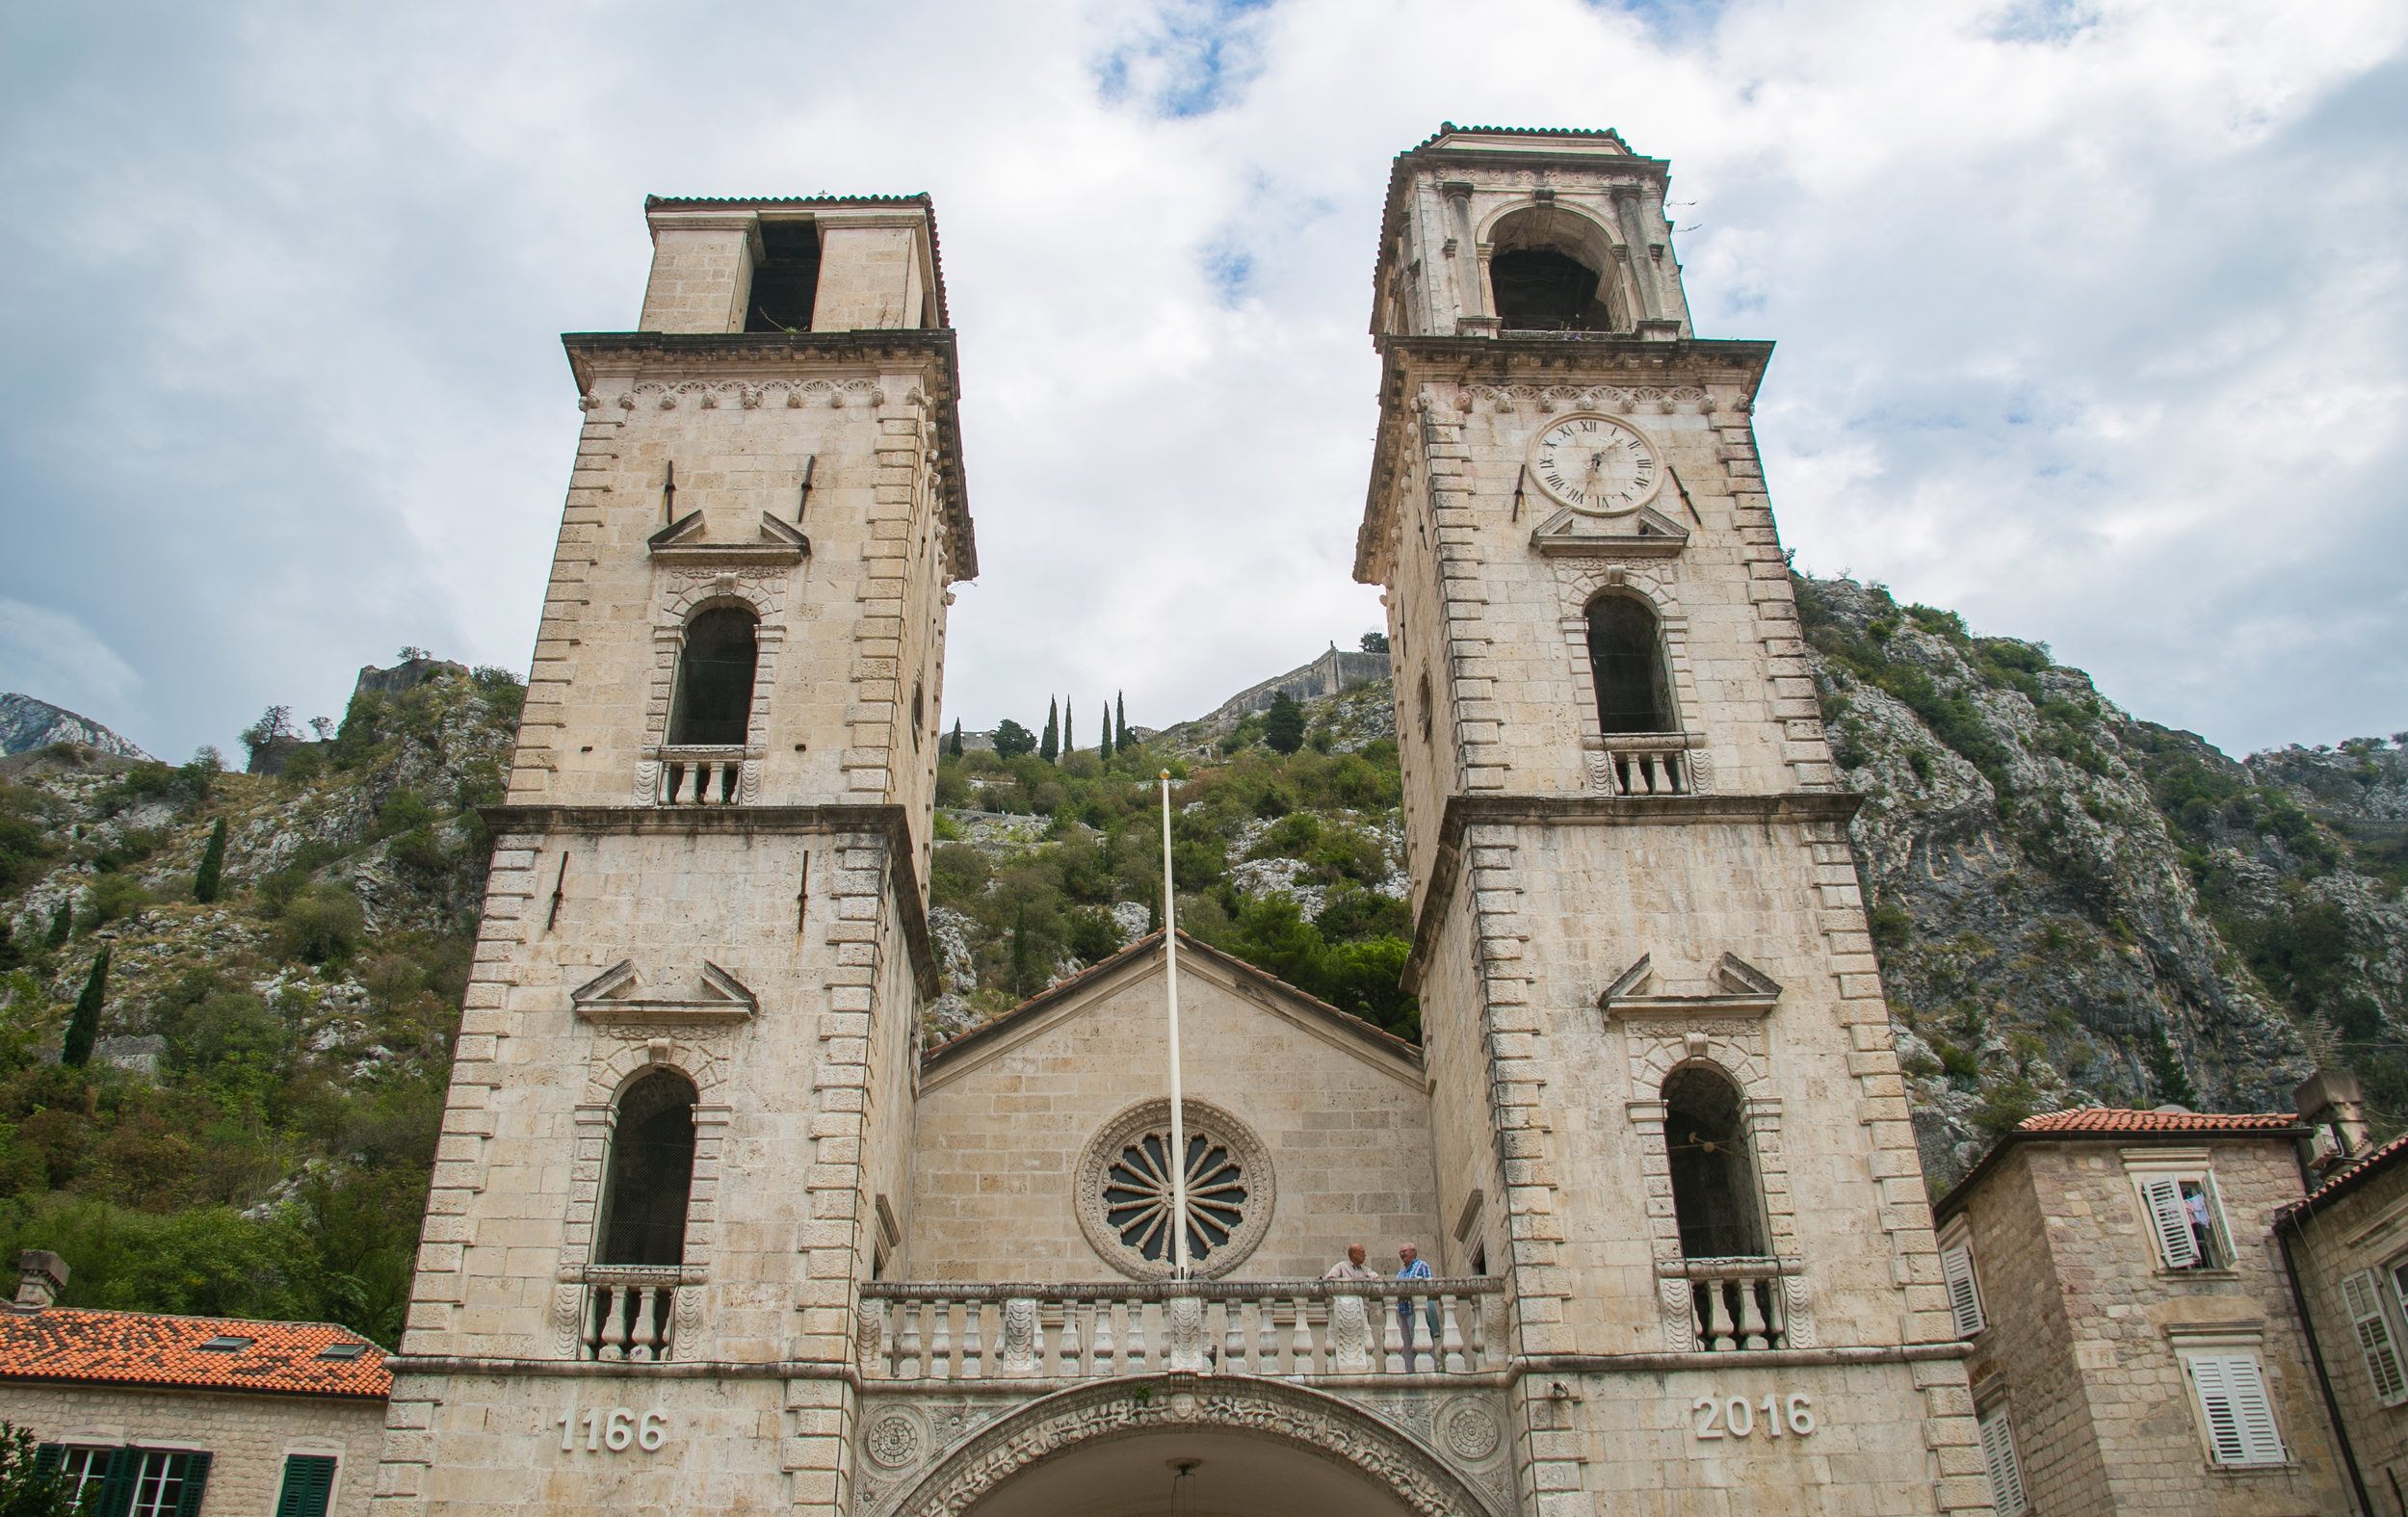  A beautiful church in the center of Old Town in Kotor, Montenegro.&nbsp; 